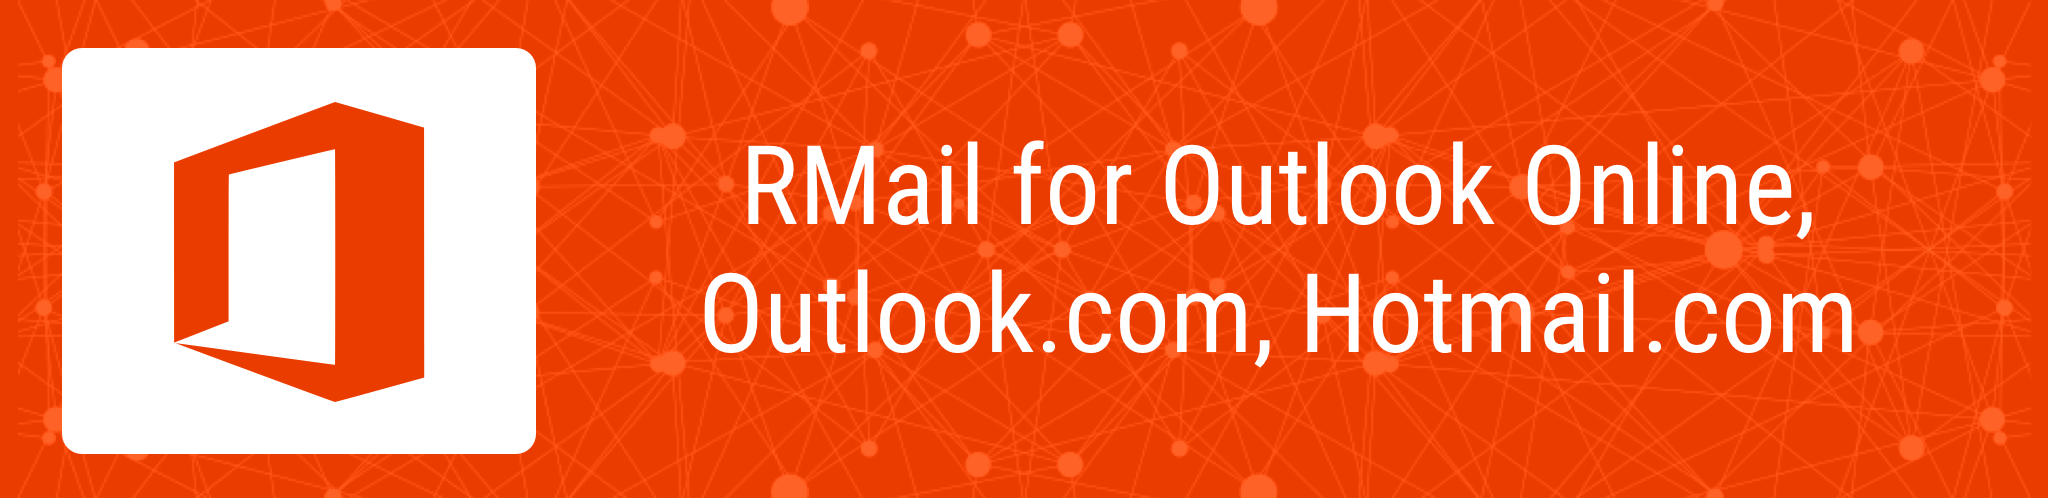 RMail for Outlook Online, Office 365 Online, Outlook.com, and Hotmail